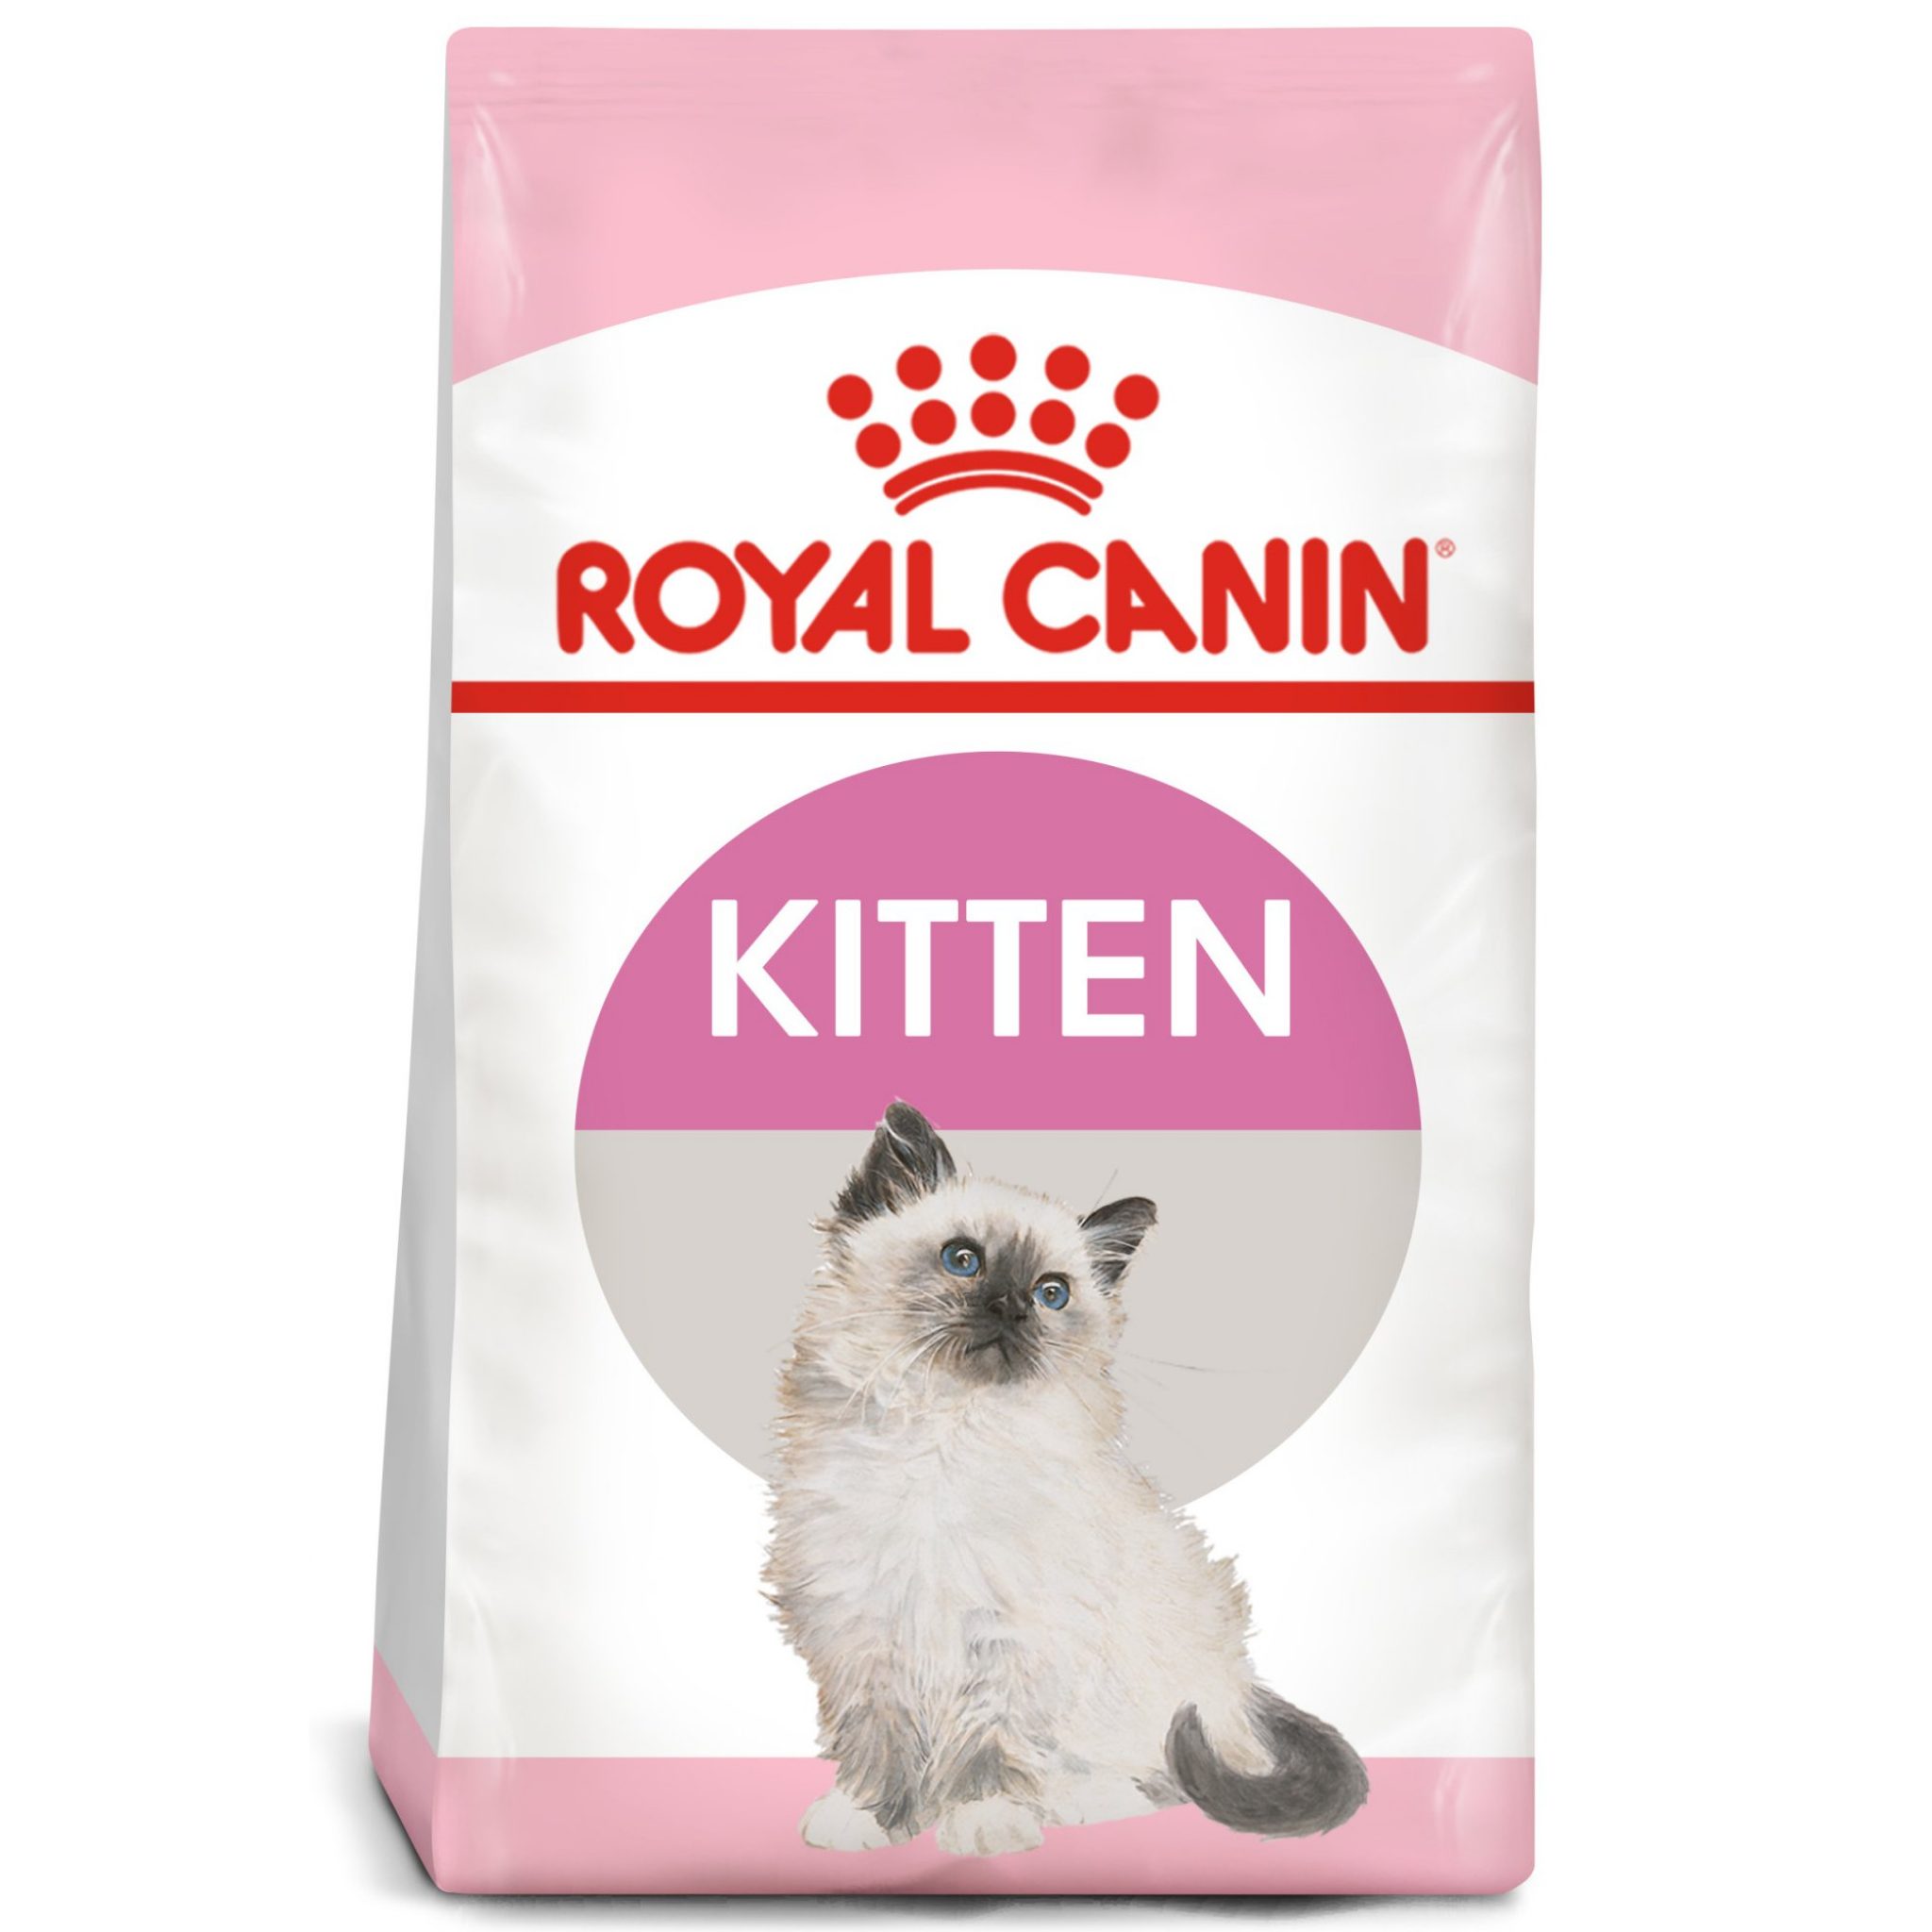 Royal Canin Feline Health Nutrition Dry Food for Young Kittens, 7 lbs